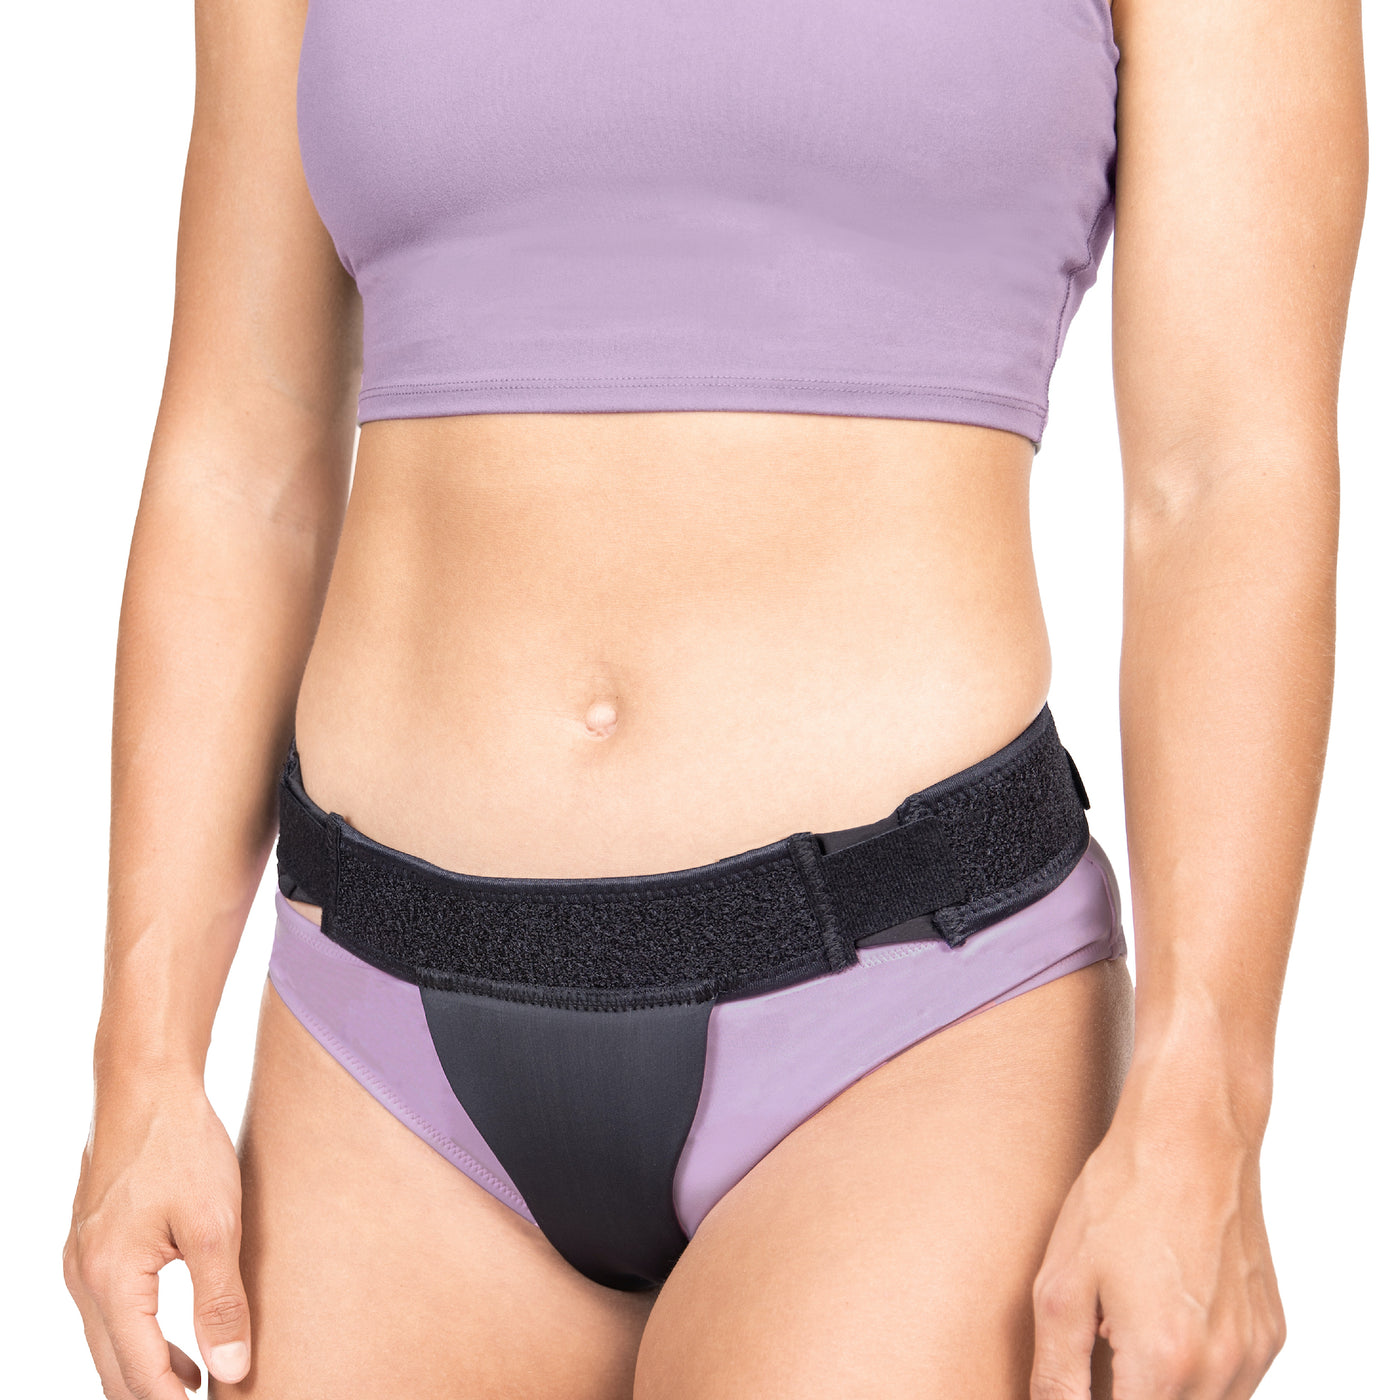 Prolapse Pelvic Support Belt  Gave Me Confidence to Get Back to Life